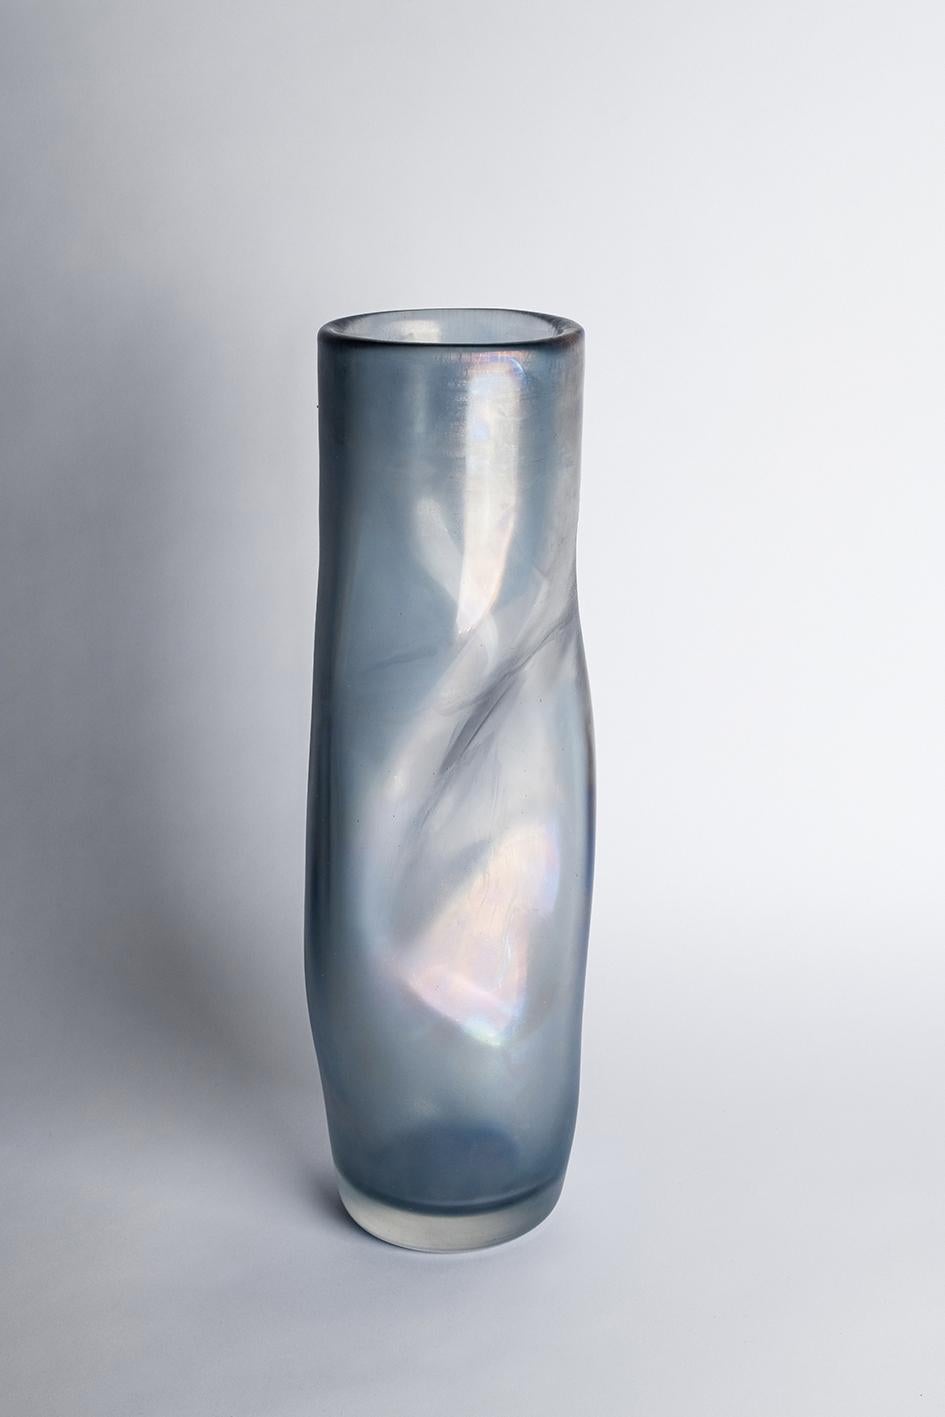 Rio vase by Purho
Dimensions: D15 x H58 cm
Materials: Murano glass
Available in other colors.

Rio is a vase from the Laguna Collection designed by Ludovica+Roberto Palomba for Purho in spring 2022.
Slender, sinuous, apparently imperfect, Rio